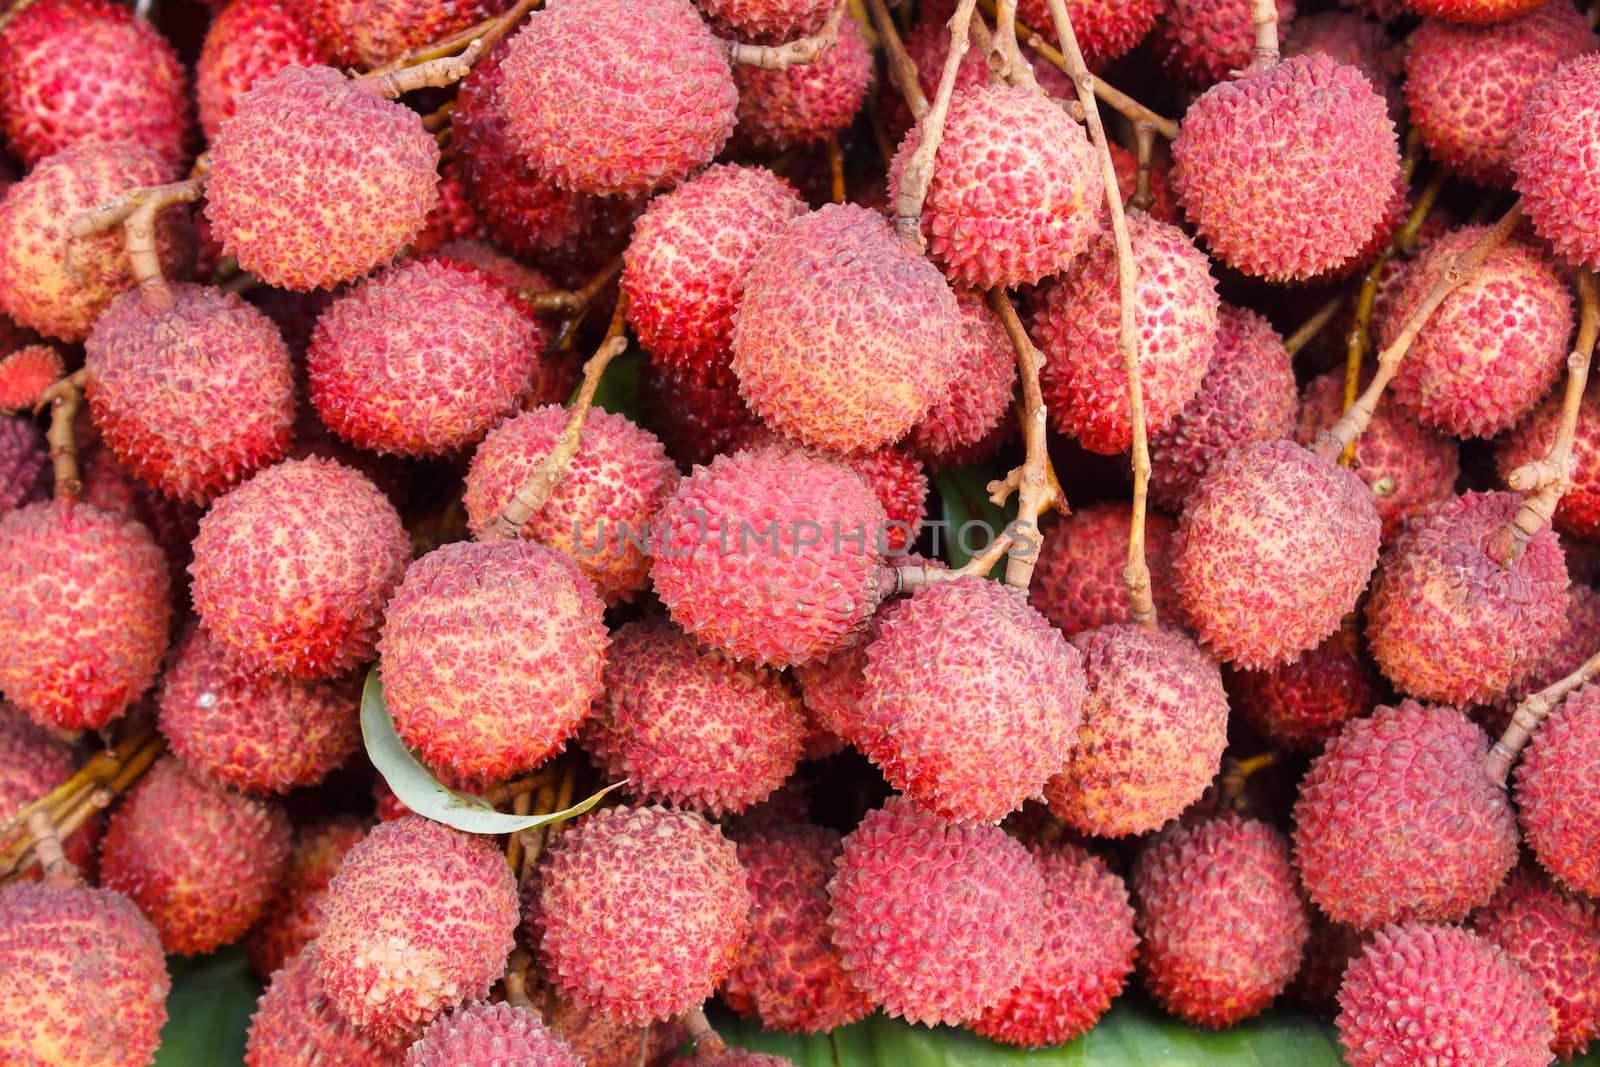  Lychees fruit  (Litchi chinensis) by vitawin